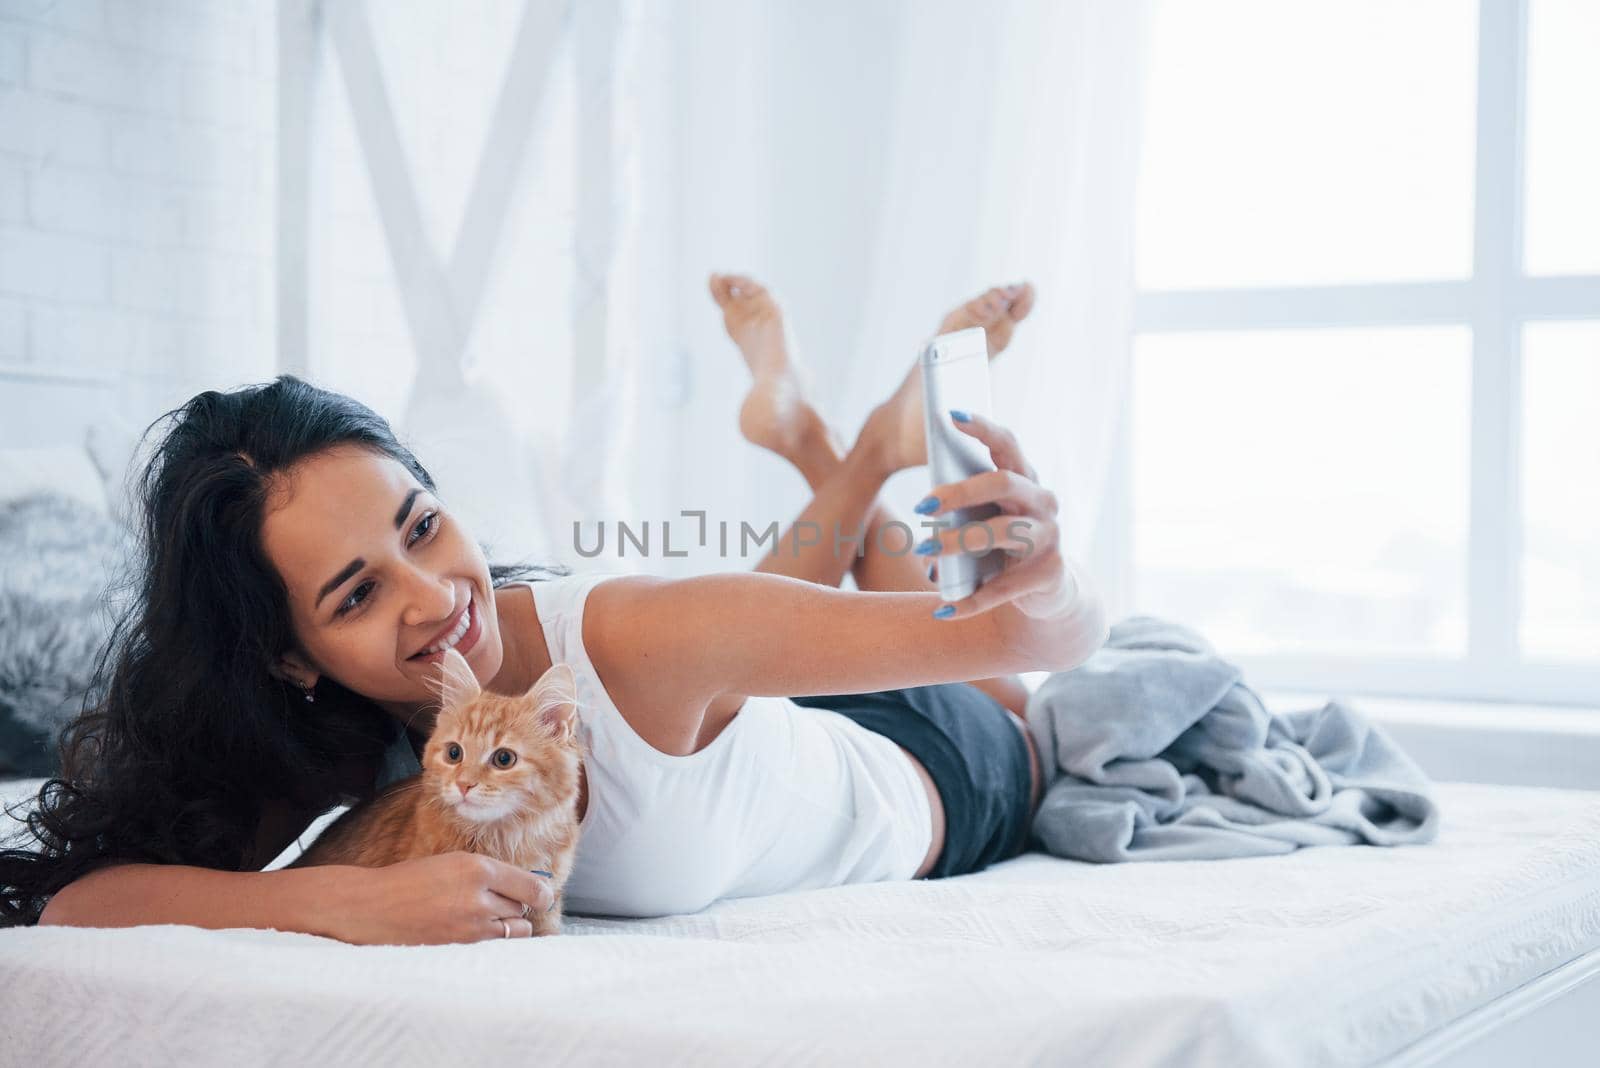 Taking selfie. Attractive blonde resting on the white bed with her cute kitten by Standret